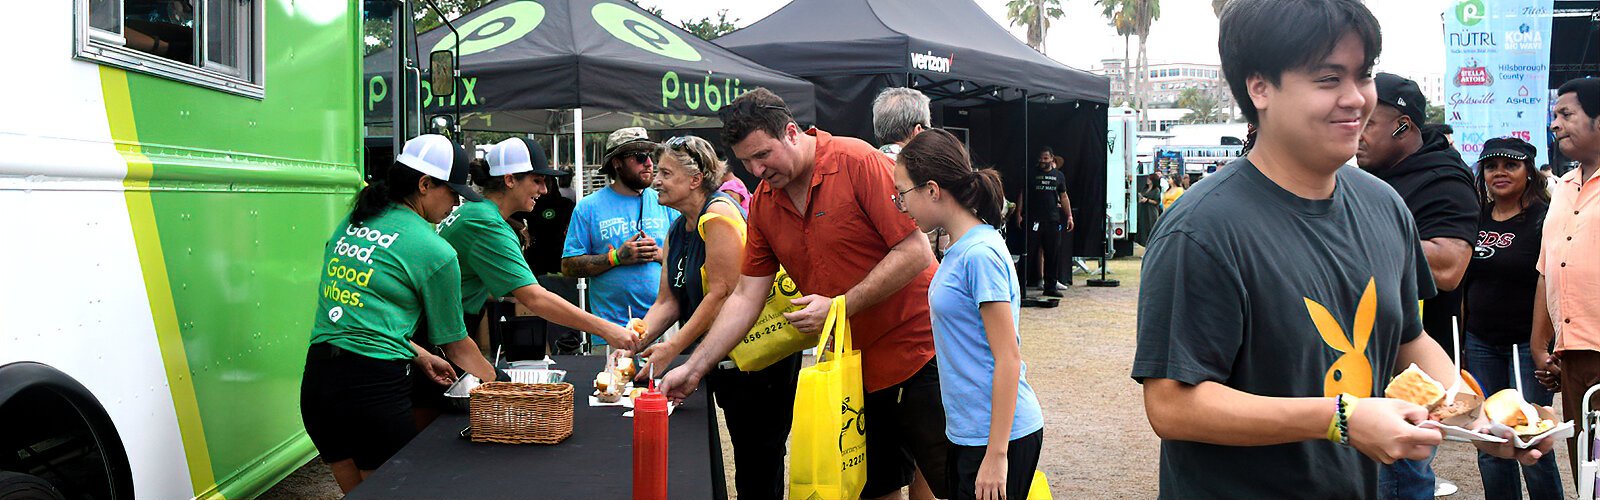 Publix Super Markets, presenting sponsor of the Tampa Riverfest, offers free cooked samples of their Smokehouse selections to festival goers at Curtis Hixon Waterfront Park.